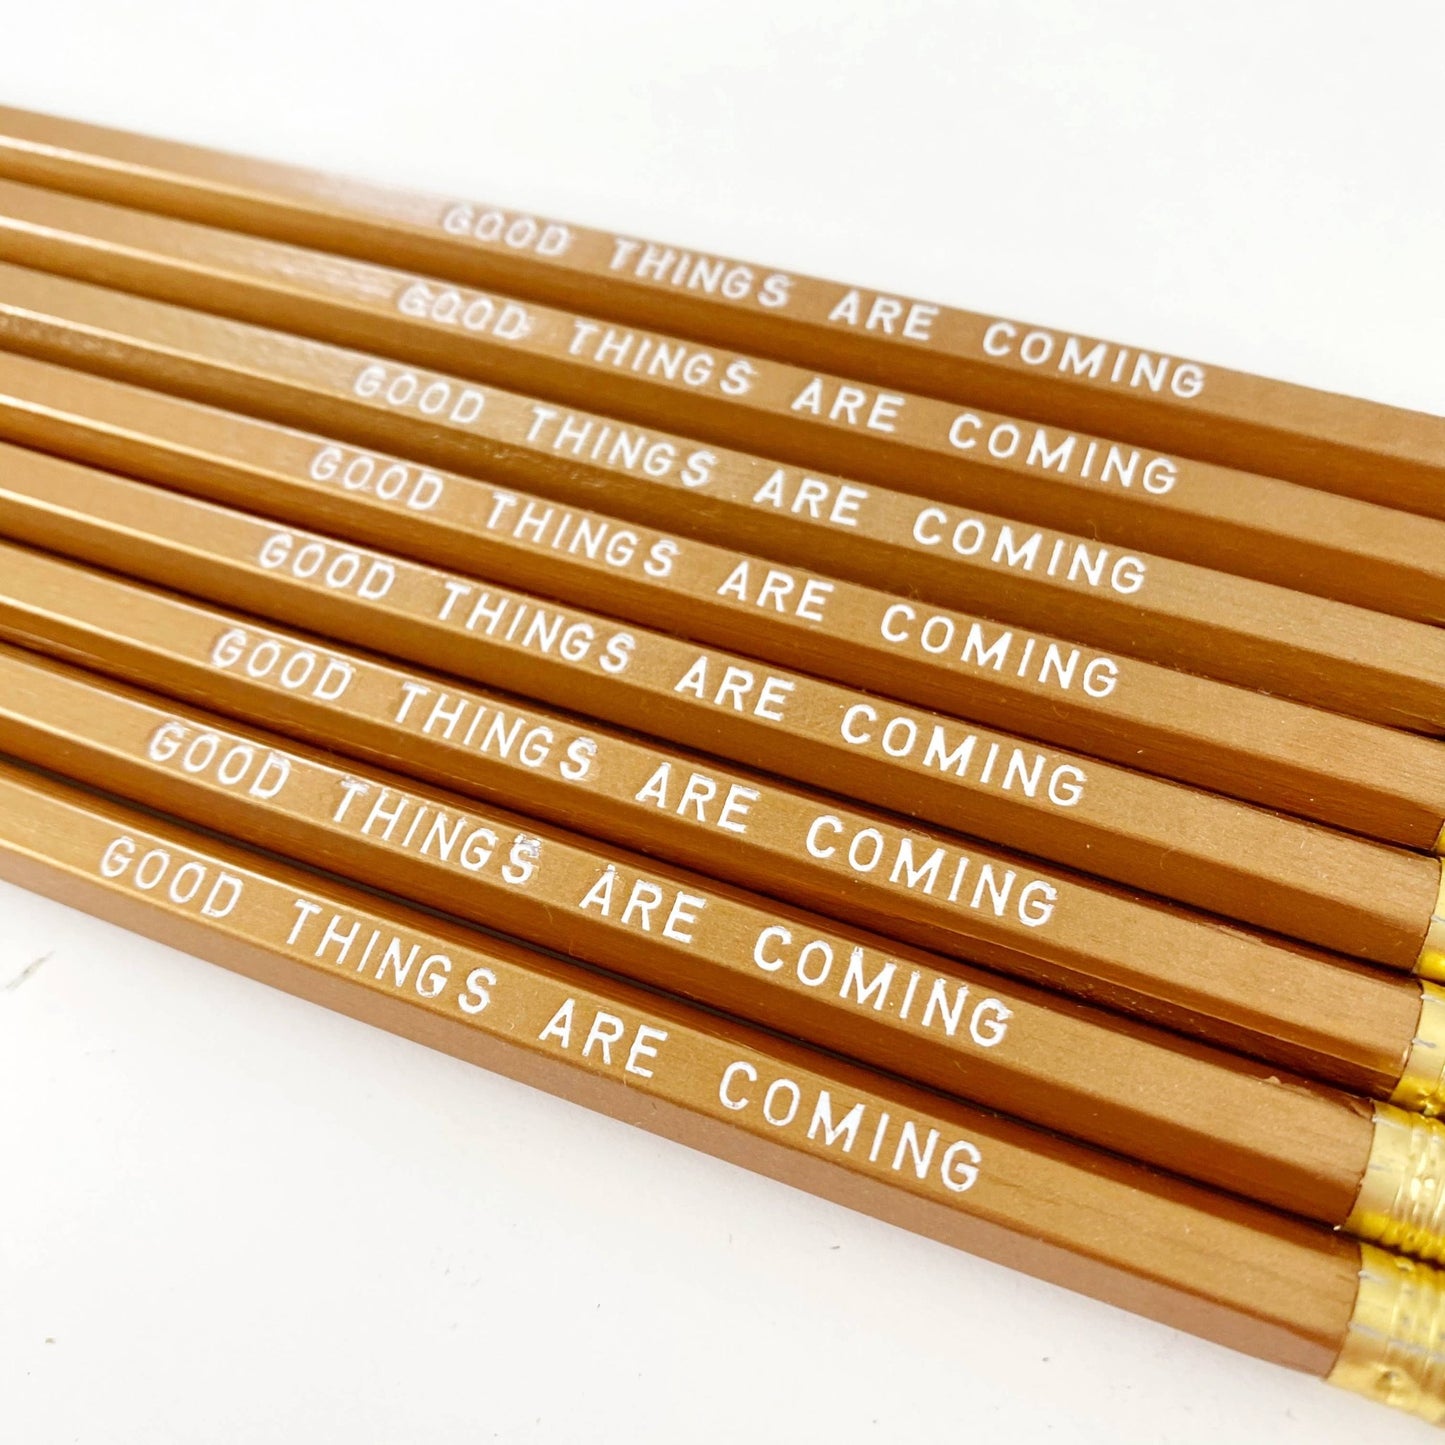 Good Things Are Coming Pencils - [ash-ling] Booksellers